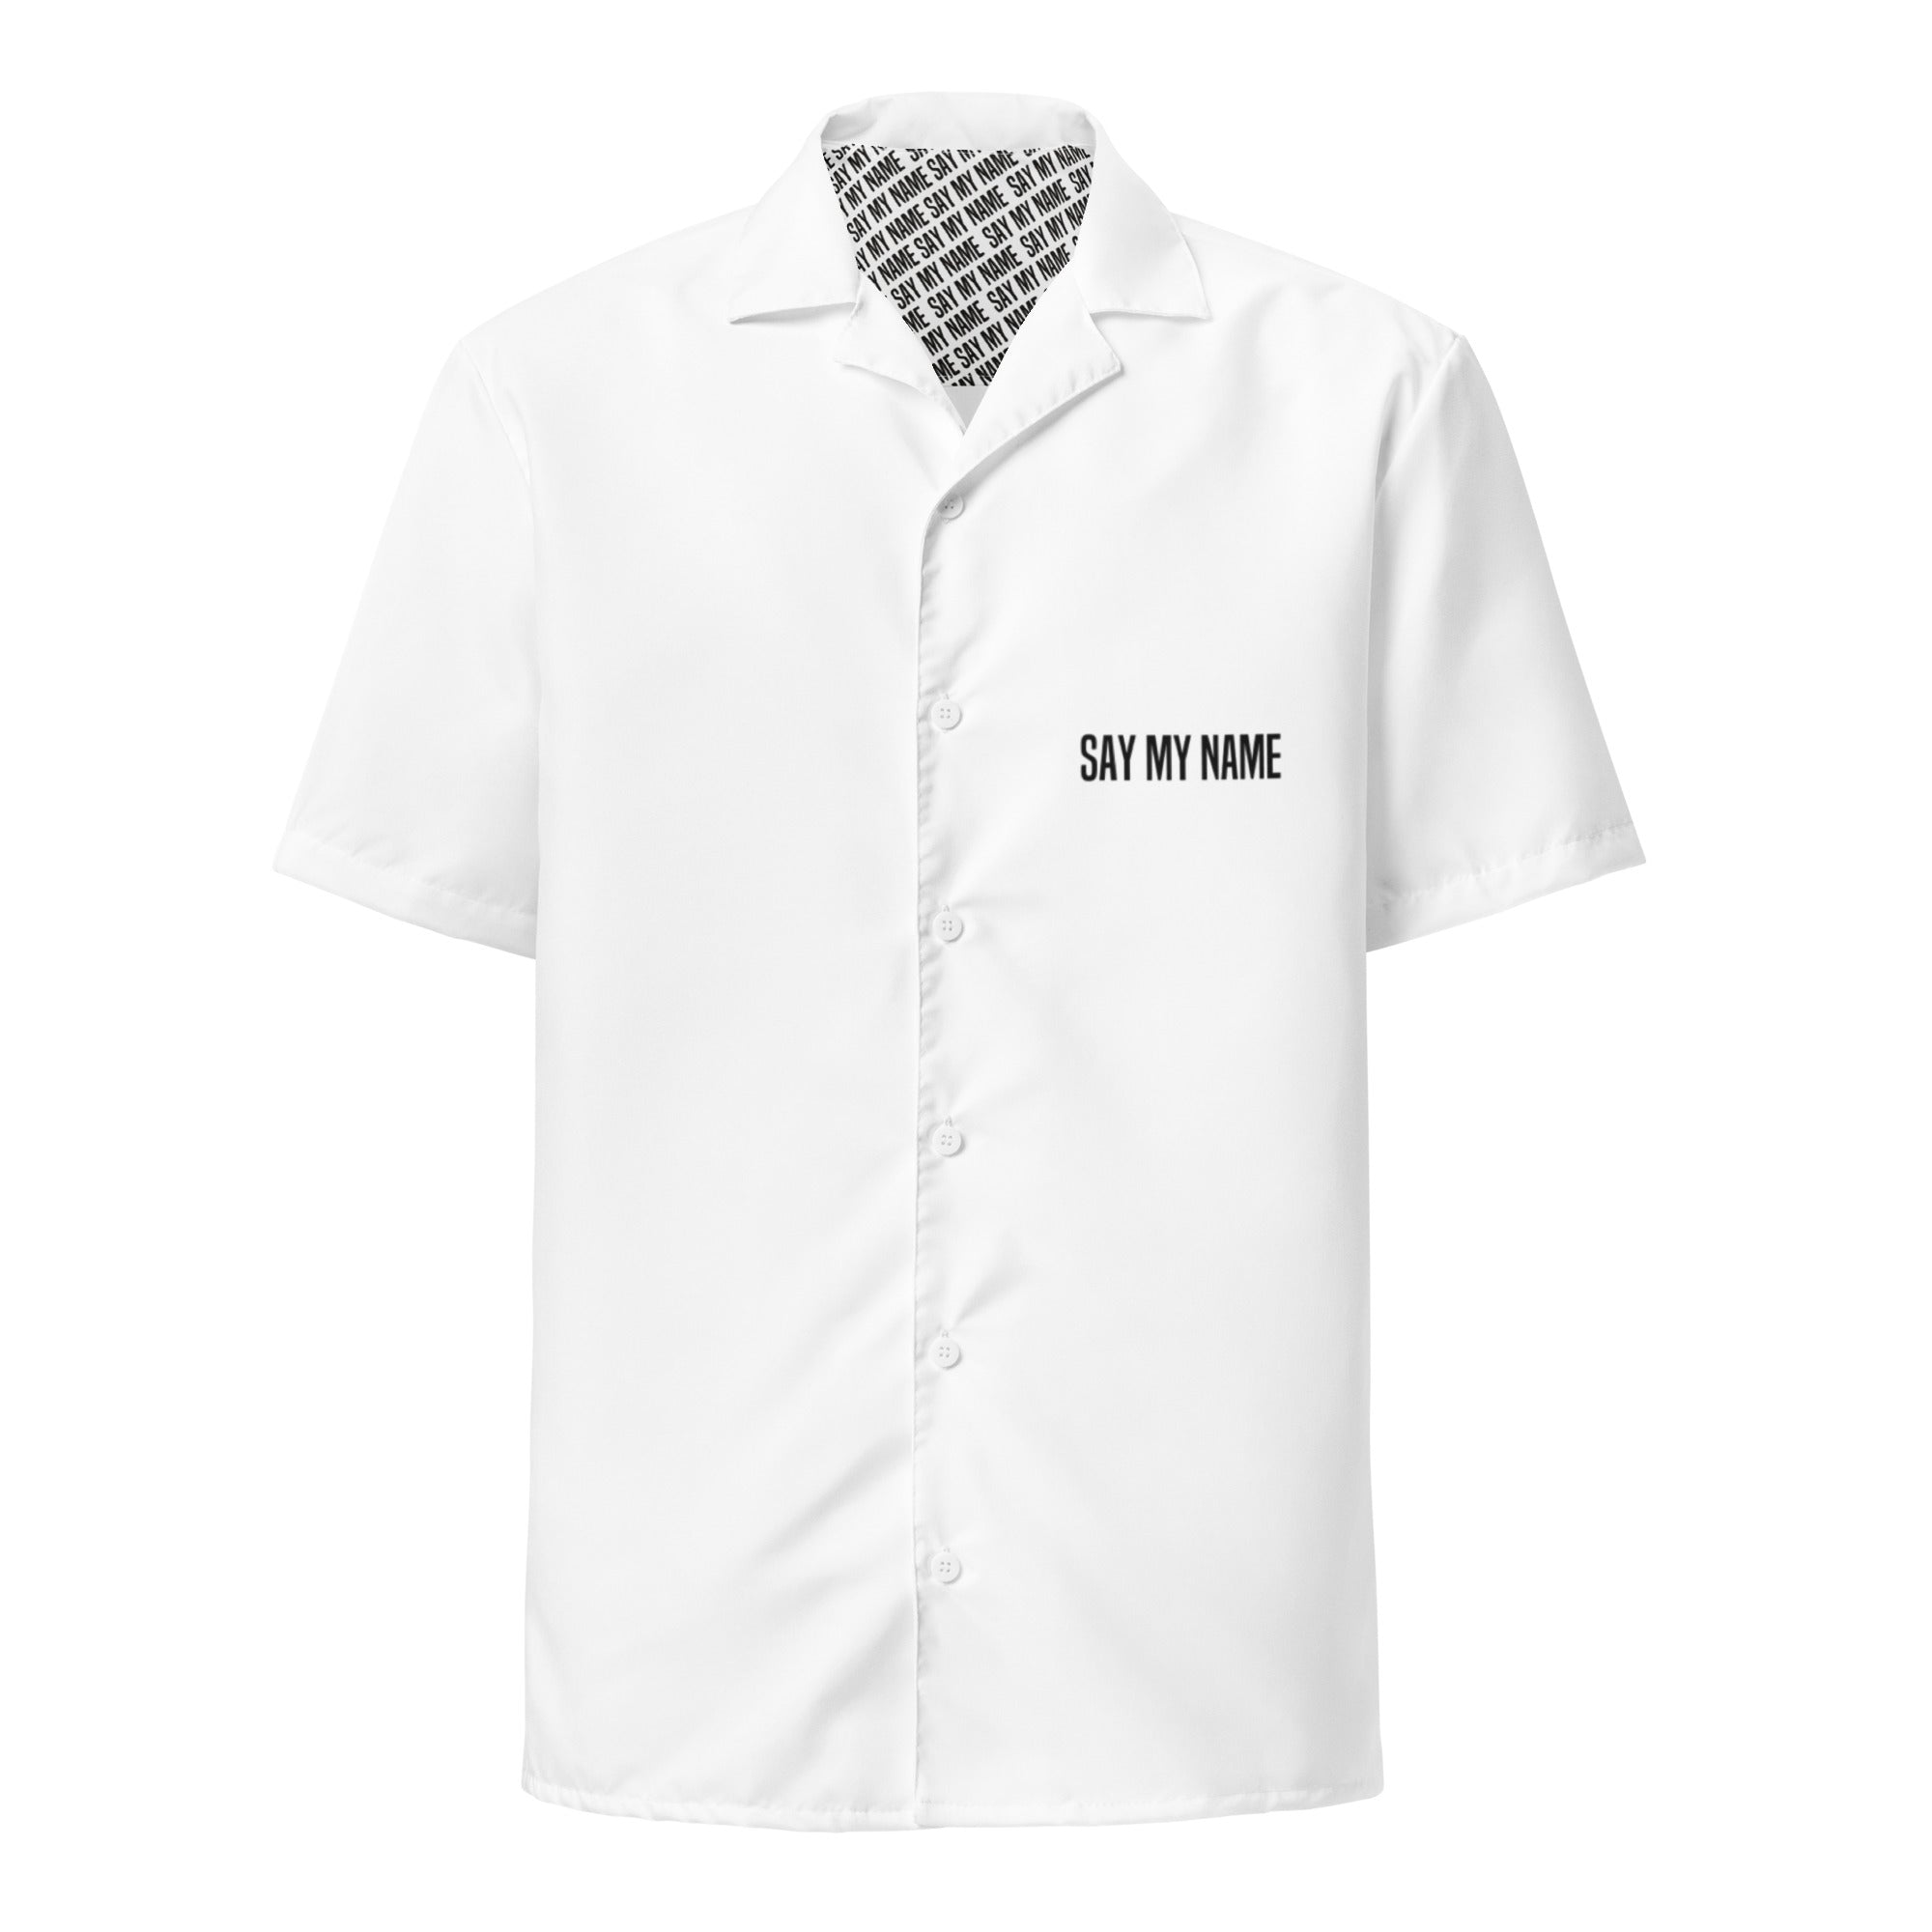 CSG unisex button-up shirt "SAY MY NAME"